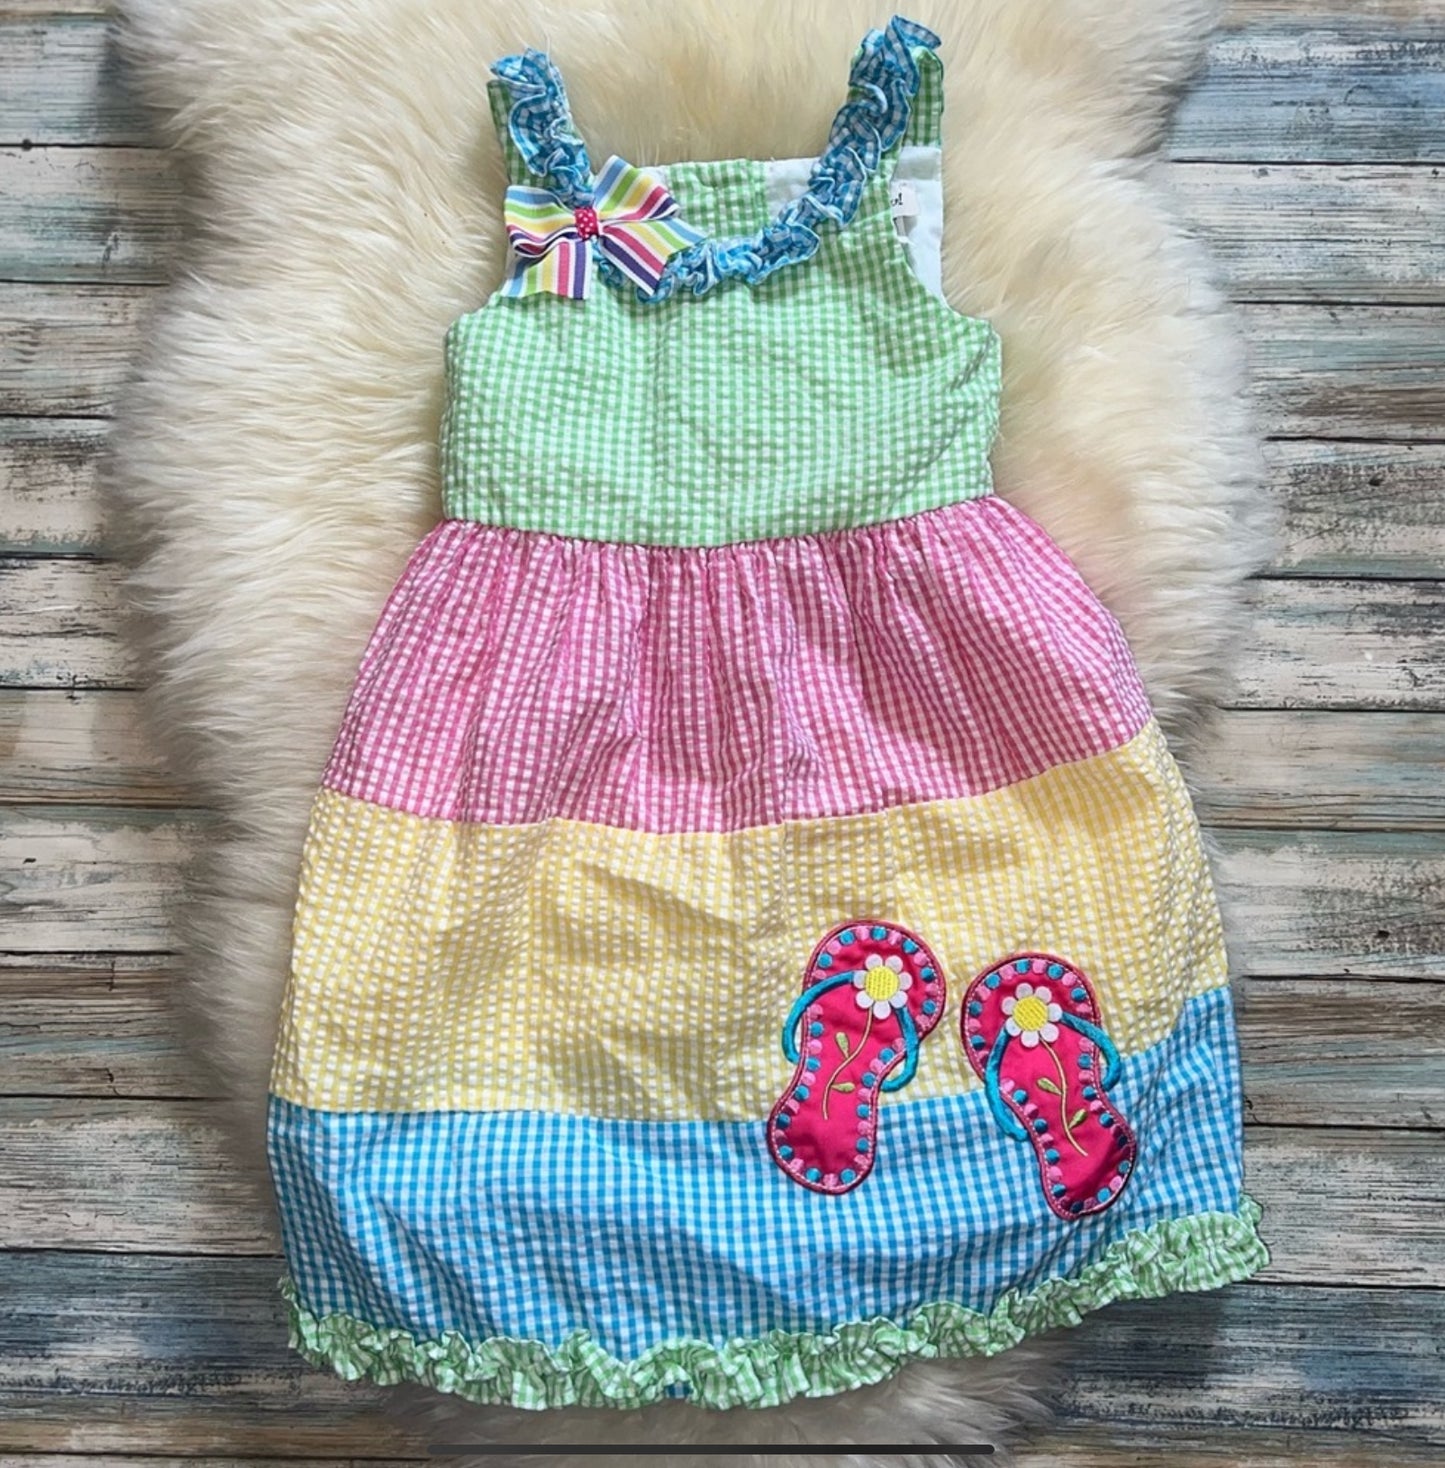 Rare, Too Girls Multicolored Summer Dress sz 4t Pre-Loved!